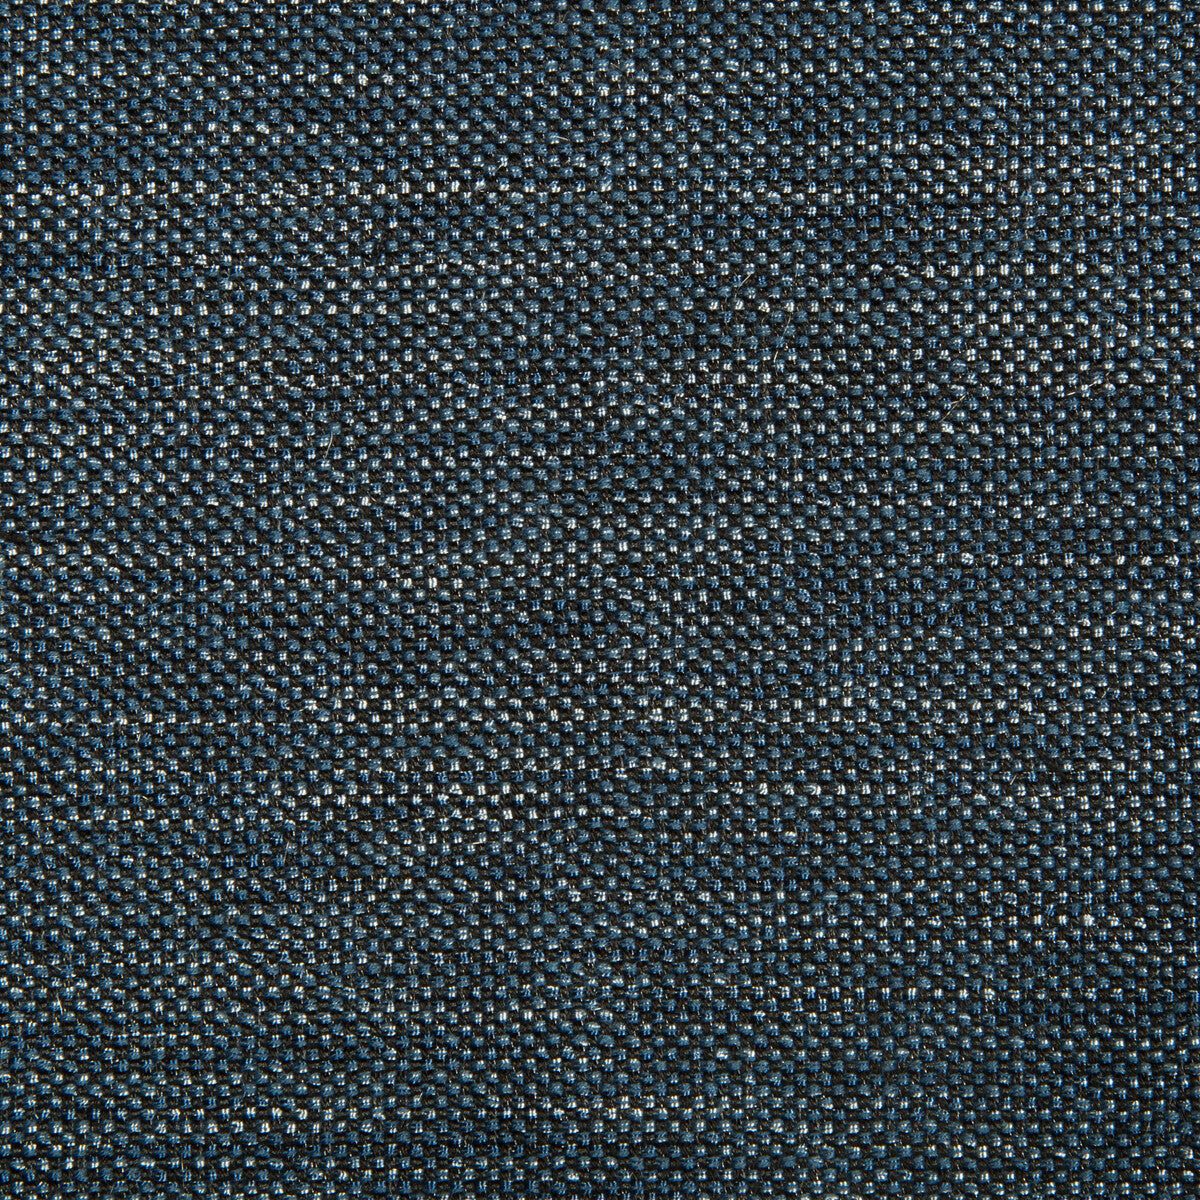 Kravet Contract fabric in 34926-50 color - pattern 34926.50.0 - by Kravet Contract